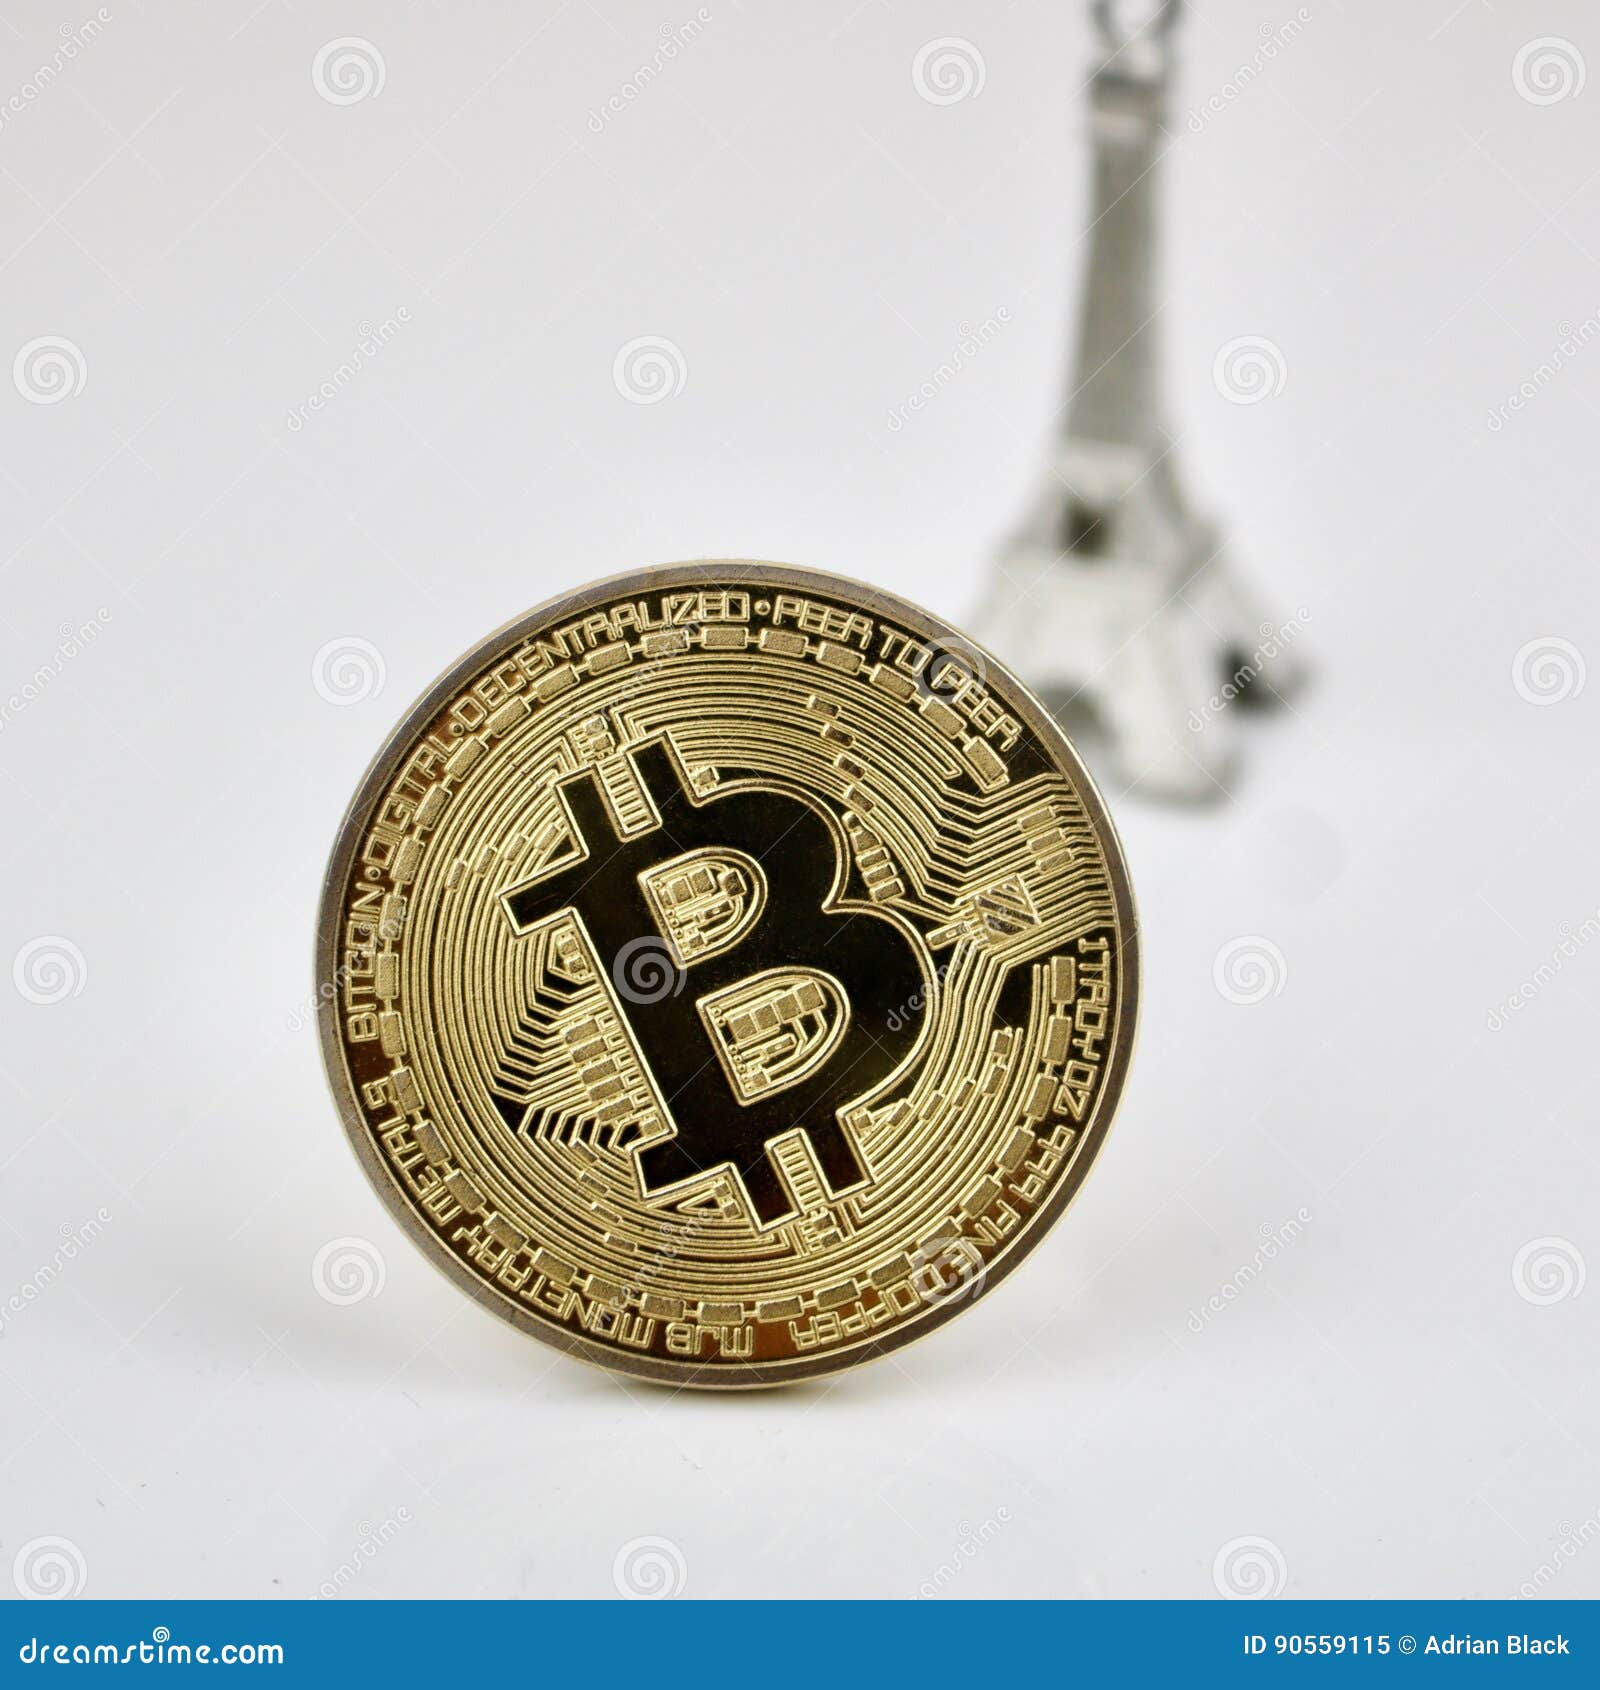 Gold Bitcoin Coin And Silver Tower Stock Image - Image of ...